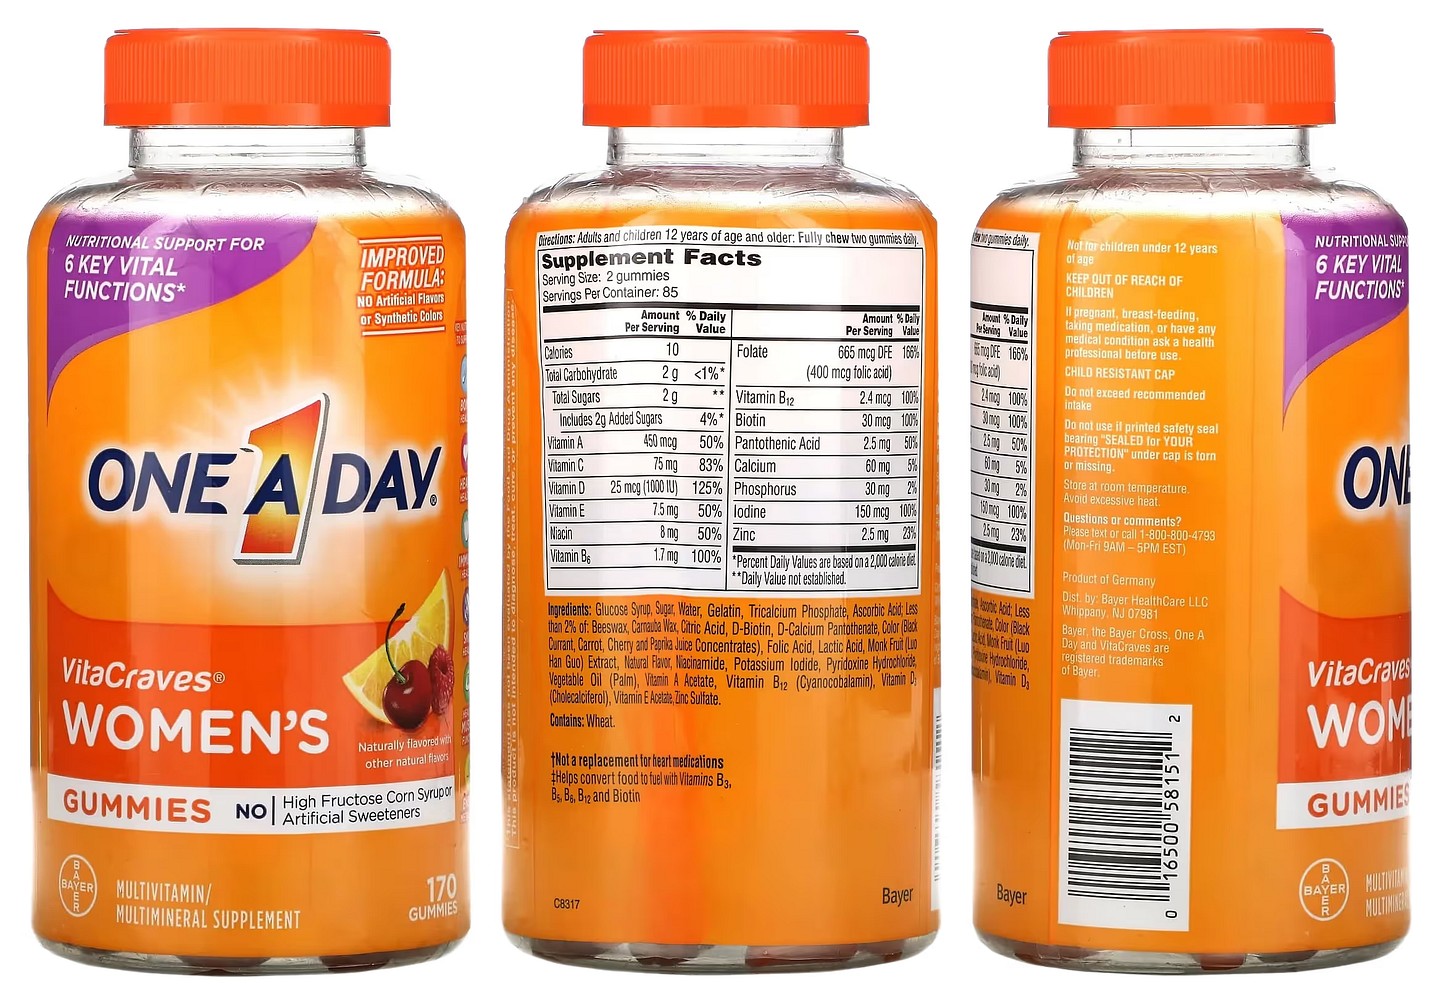 One-A-Day, Women's VitaCraves packaging